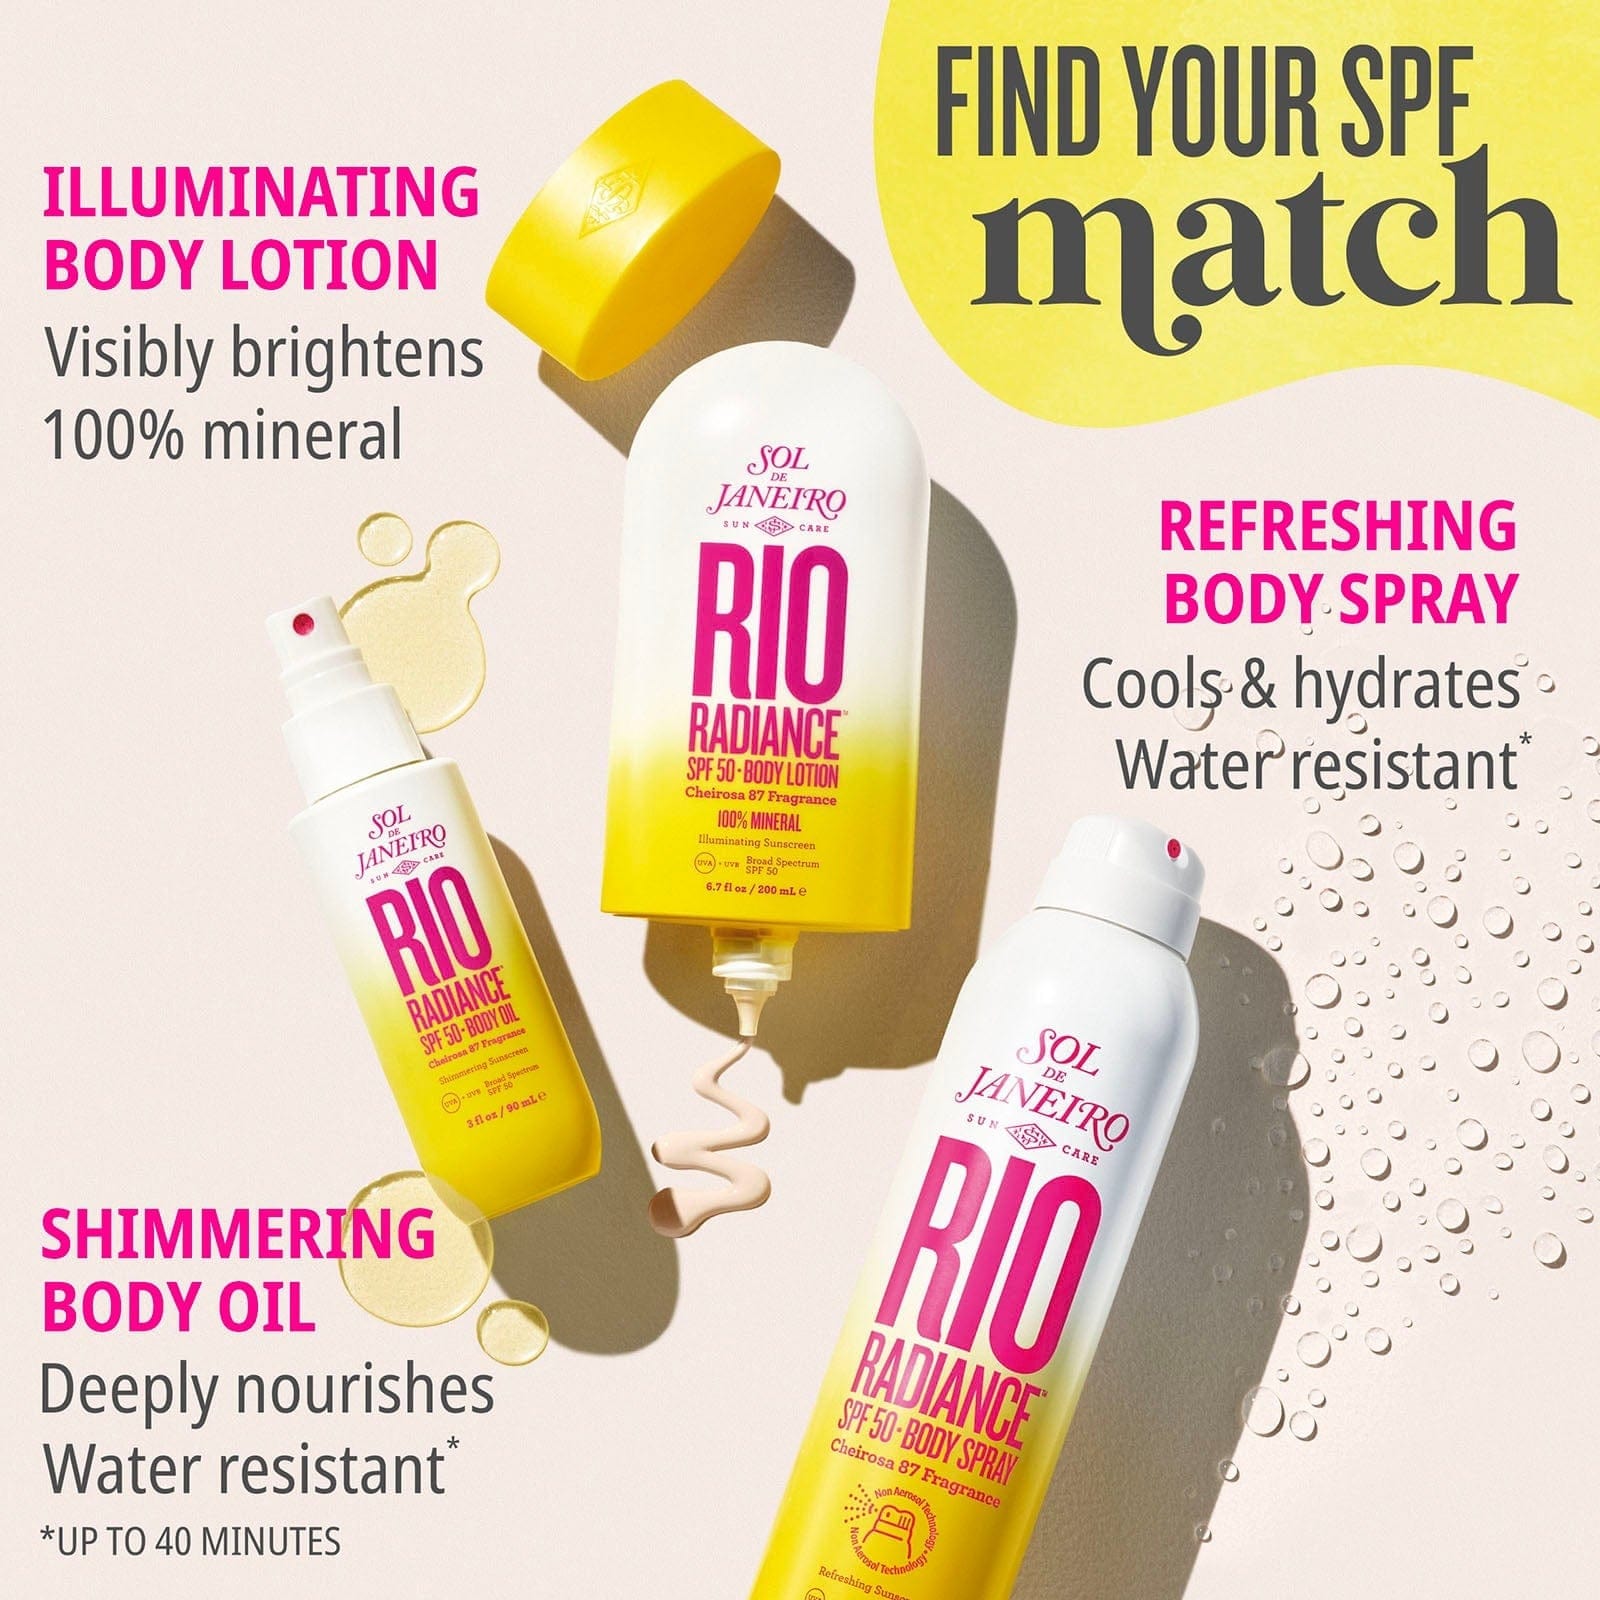 Find your spf match - illuminating body lotion, visibly brightens 100% mineral, Refreshing body spray, cools &amp; hydrates water resistant. Shimmering body oil deeply nourishes water resistant*